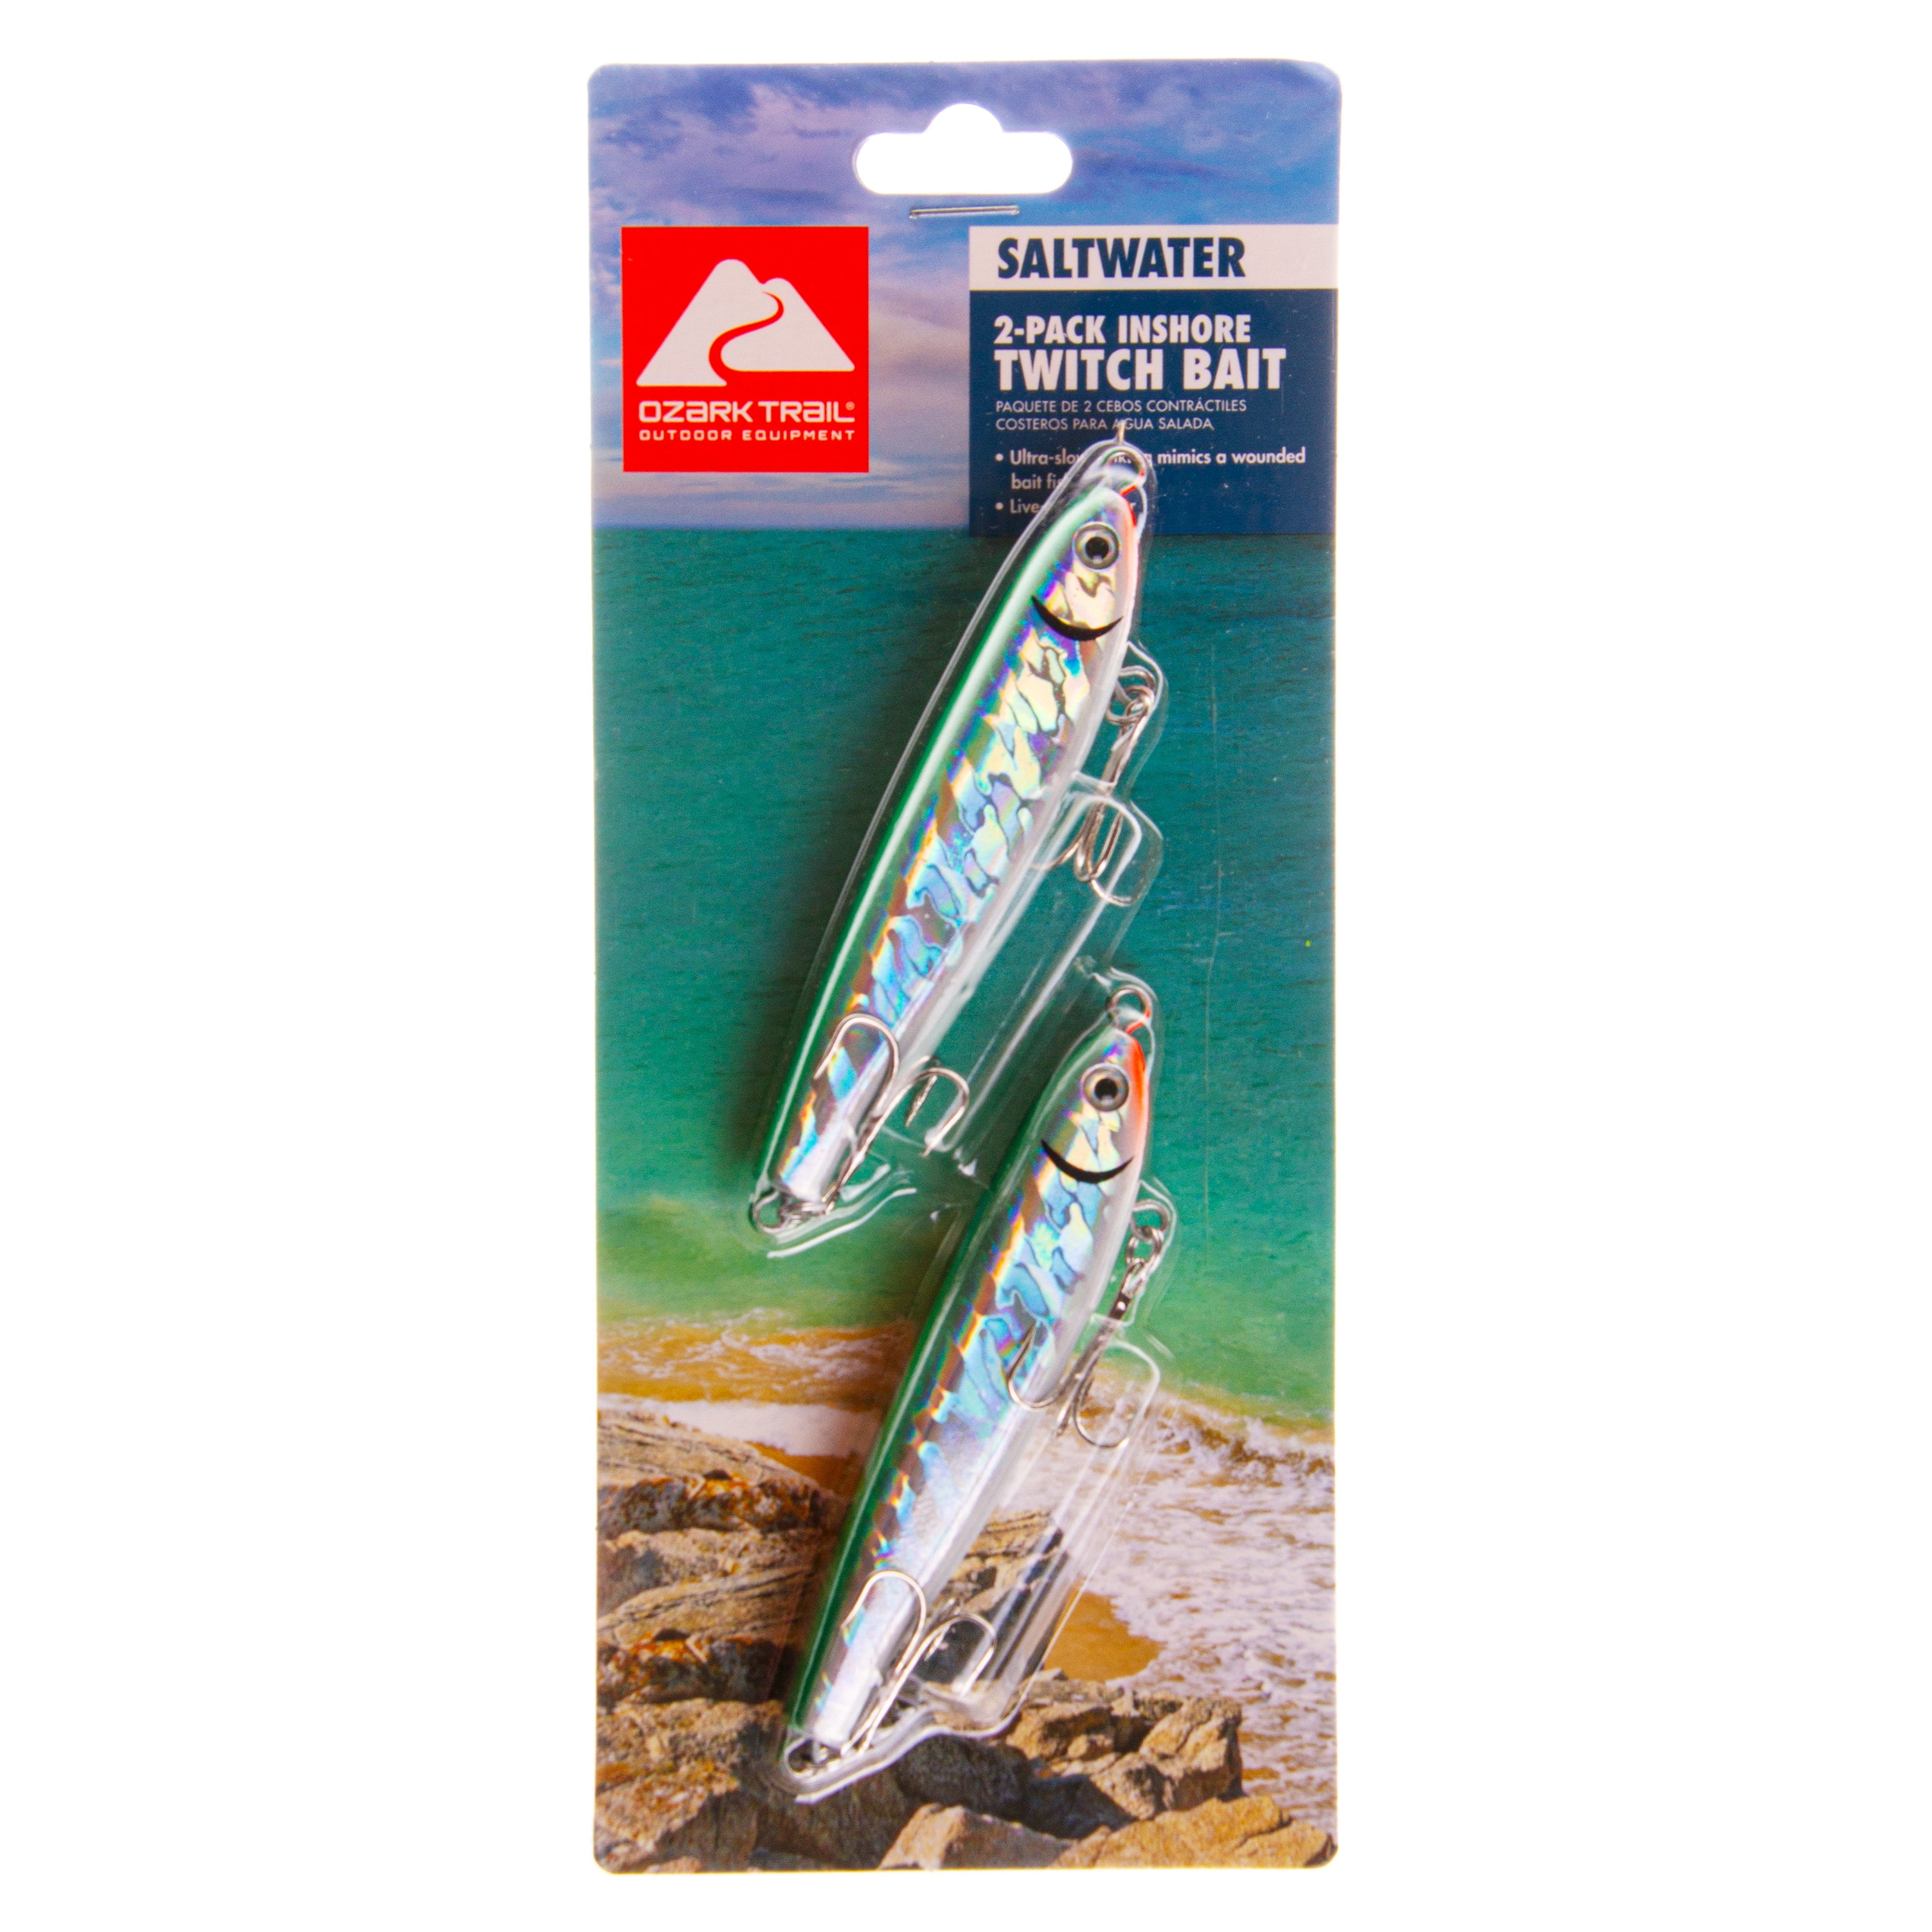 Ozark Trails Hard Plastic Saltwater Inshore Twitch BaitFishing Lure,  2-pack. Painted in fish attracting colors.